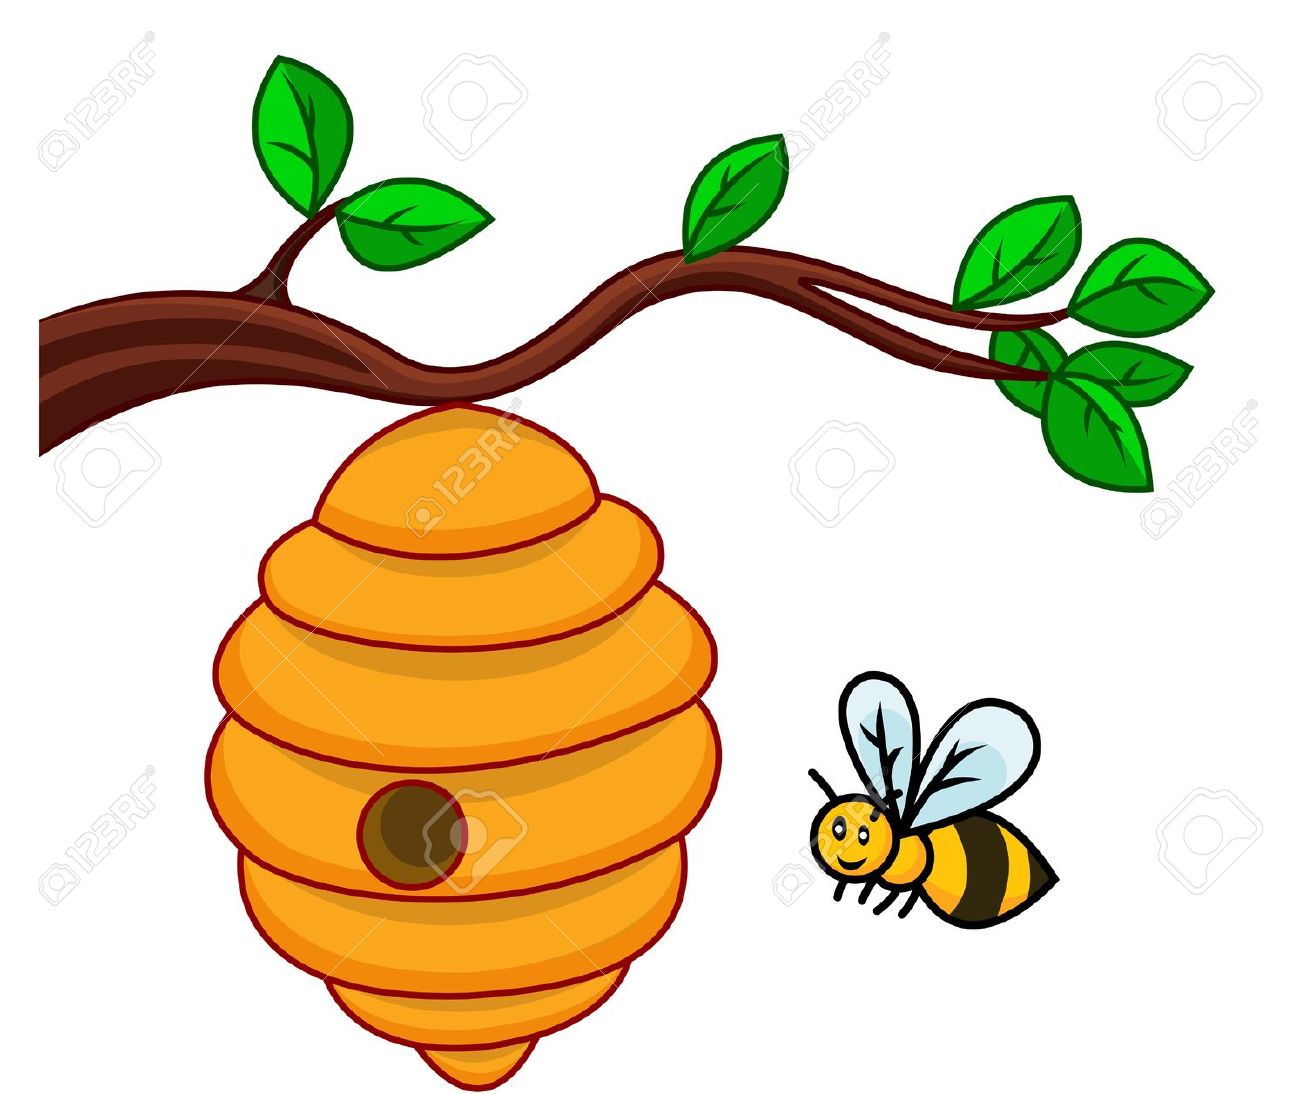 Beehive clipart free images 2